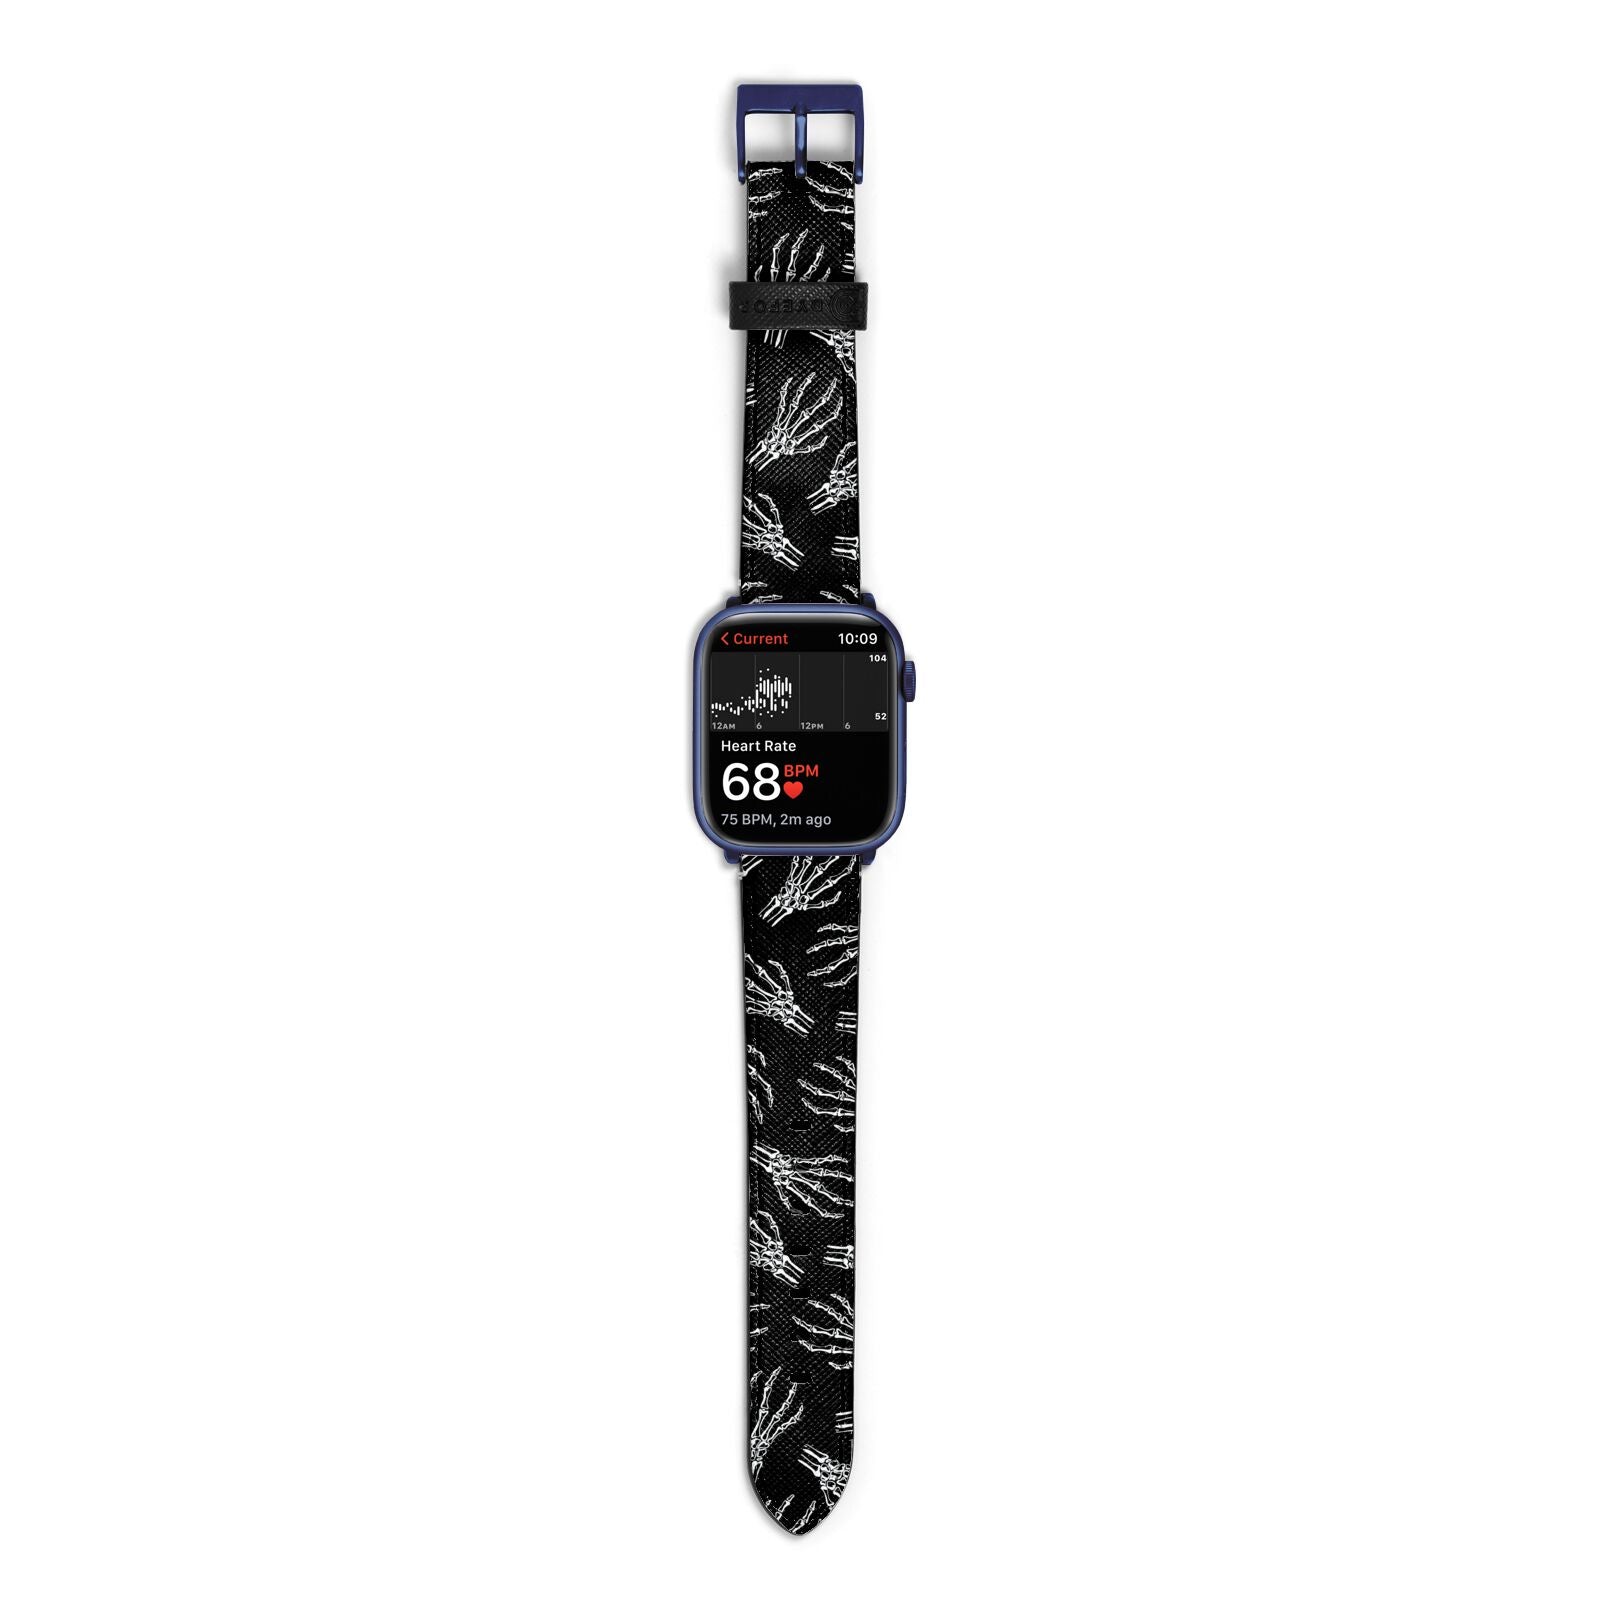 Skeleton Hands Apple Watch Strap Size 38mm with Blue Hardware